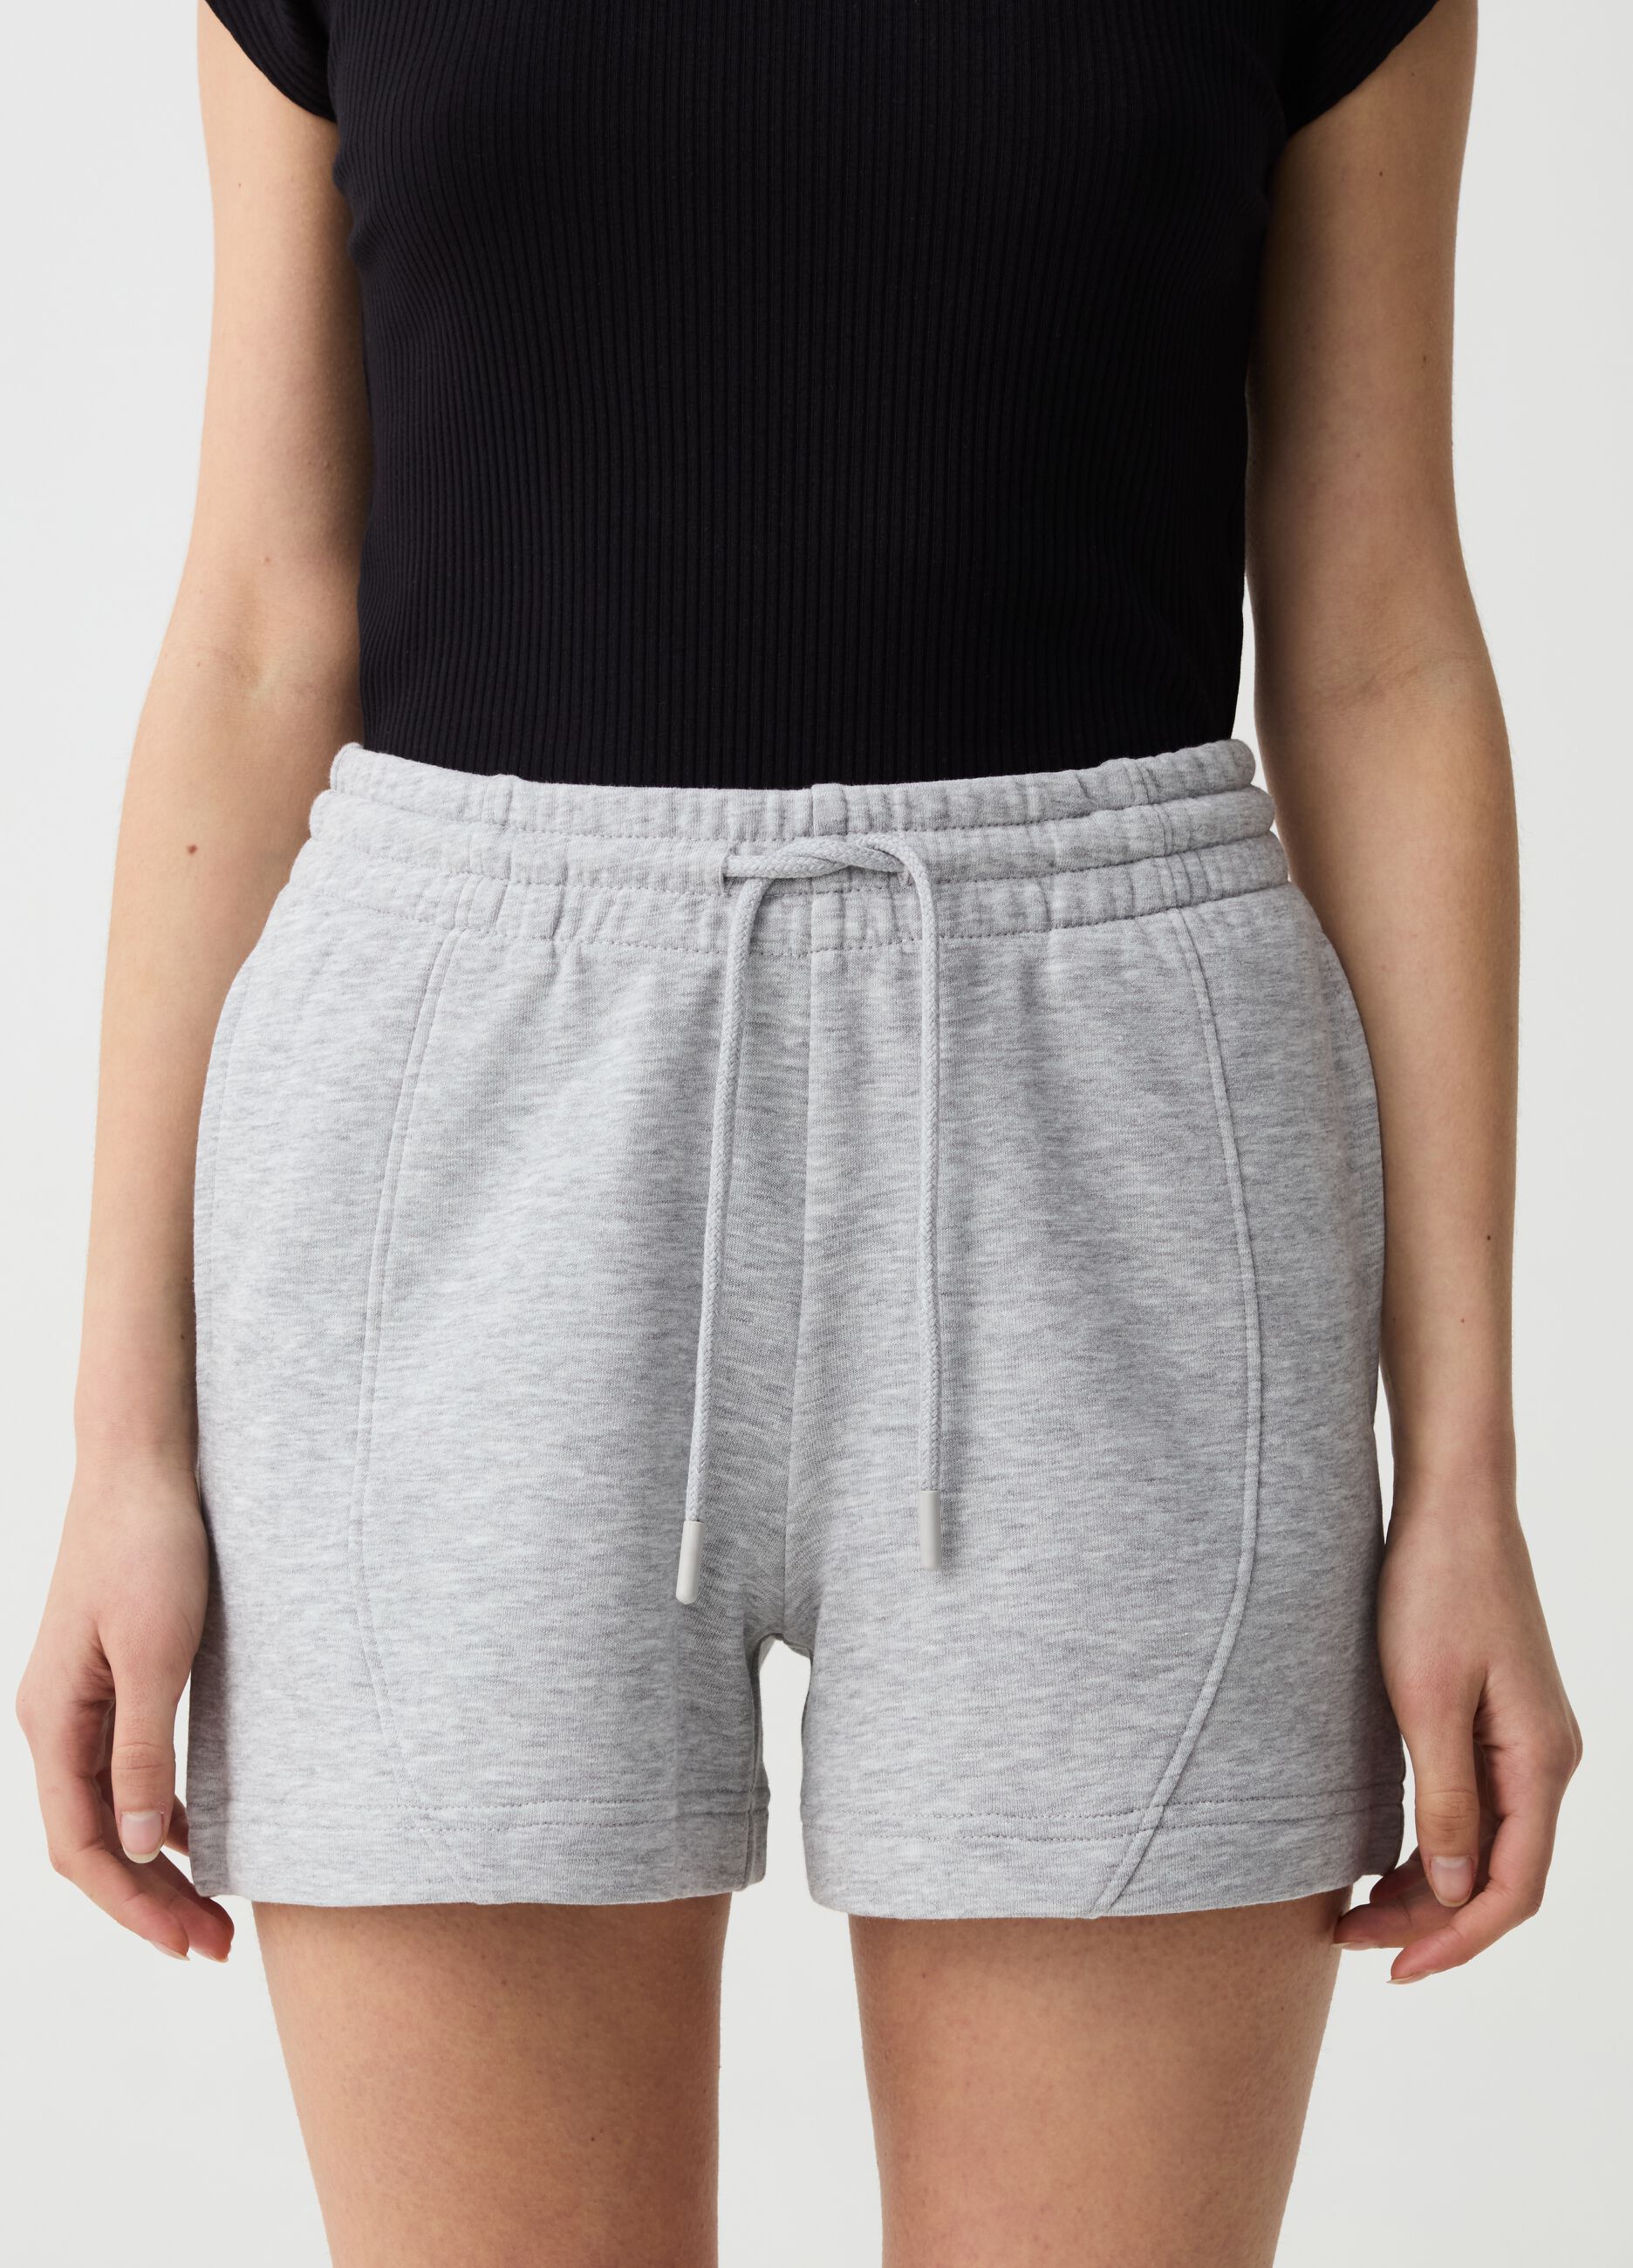 Essential shorts with raised stitching